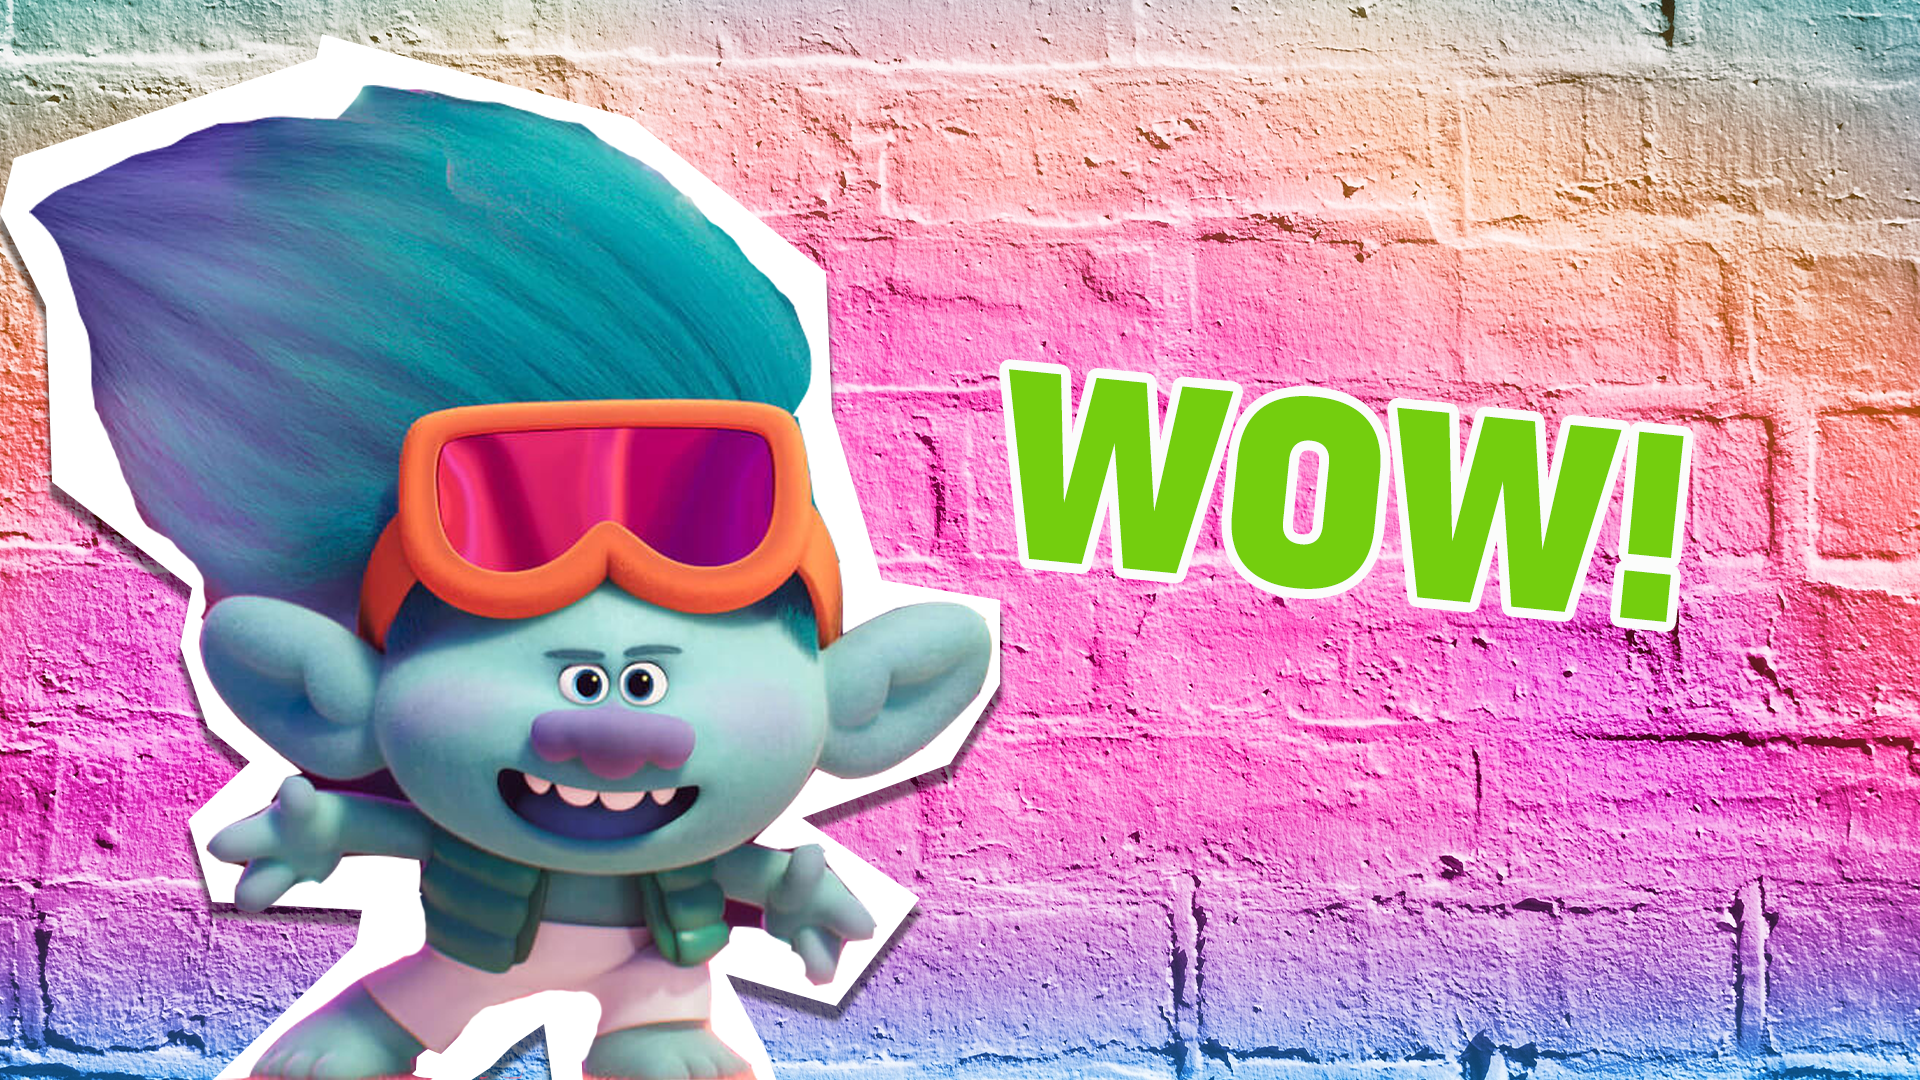 Woah! Incredible! You're officially the number one Trolls fan! Congrats!